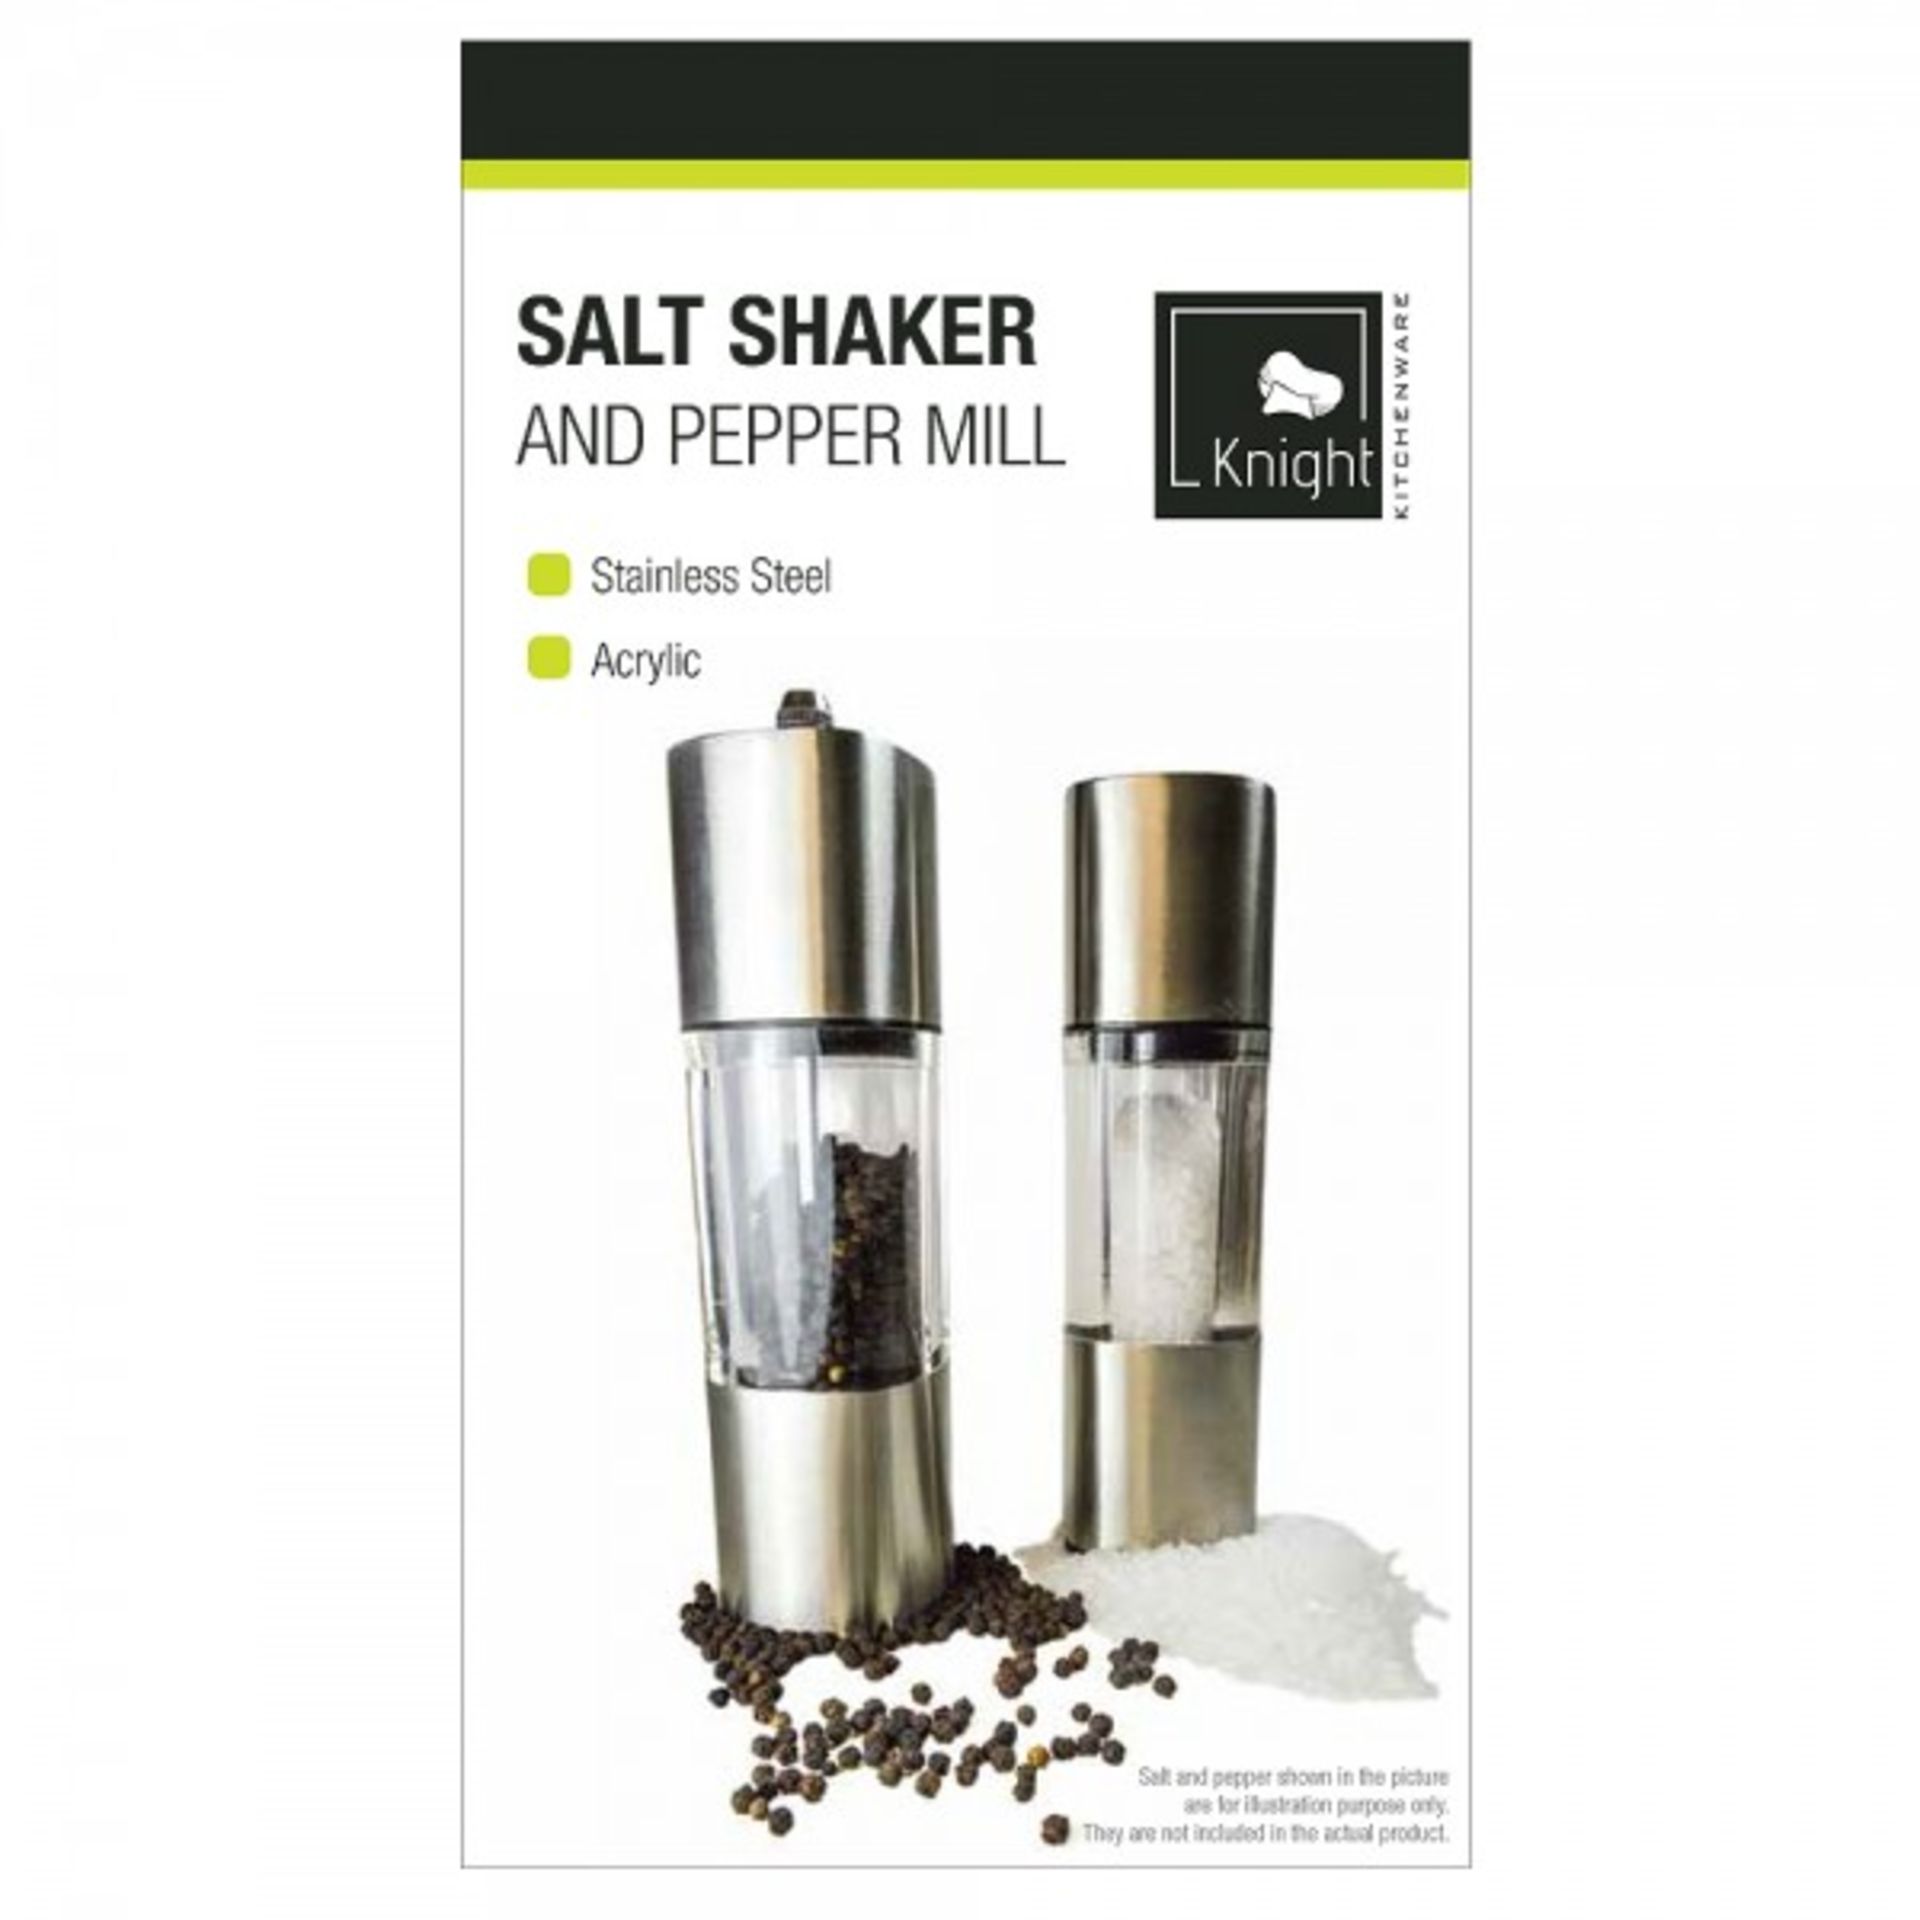 V *TRADE QTY* Brand New Stainless Steel Salt & Pepper Mill X 3 YOUR BID PRICE TO BE MULTIPLIED BY